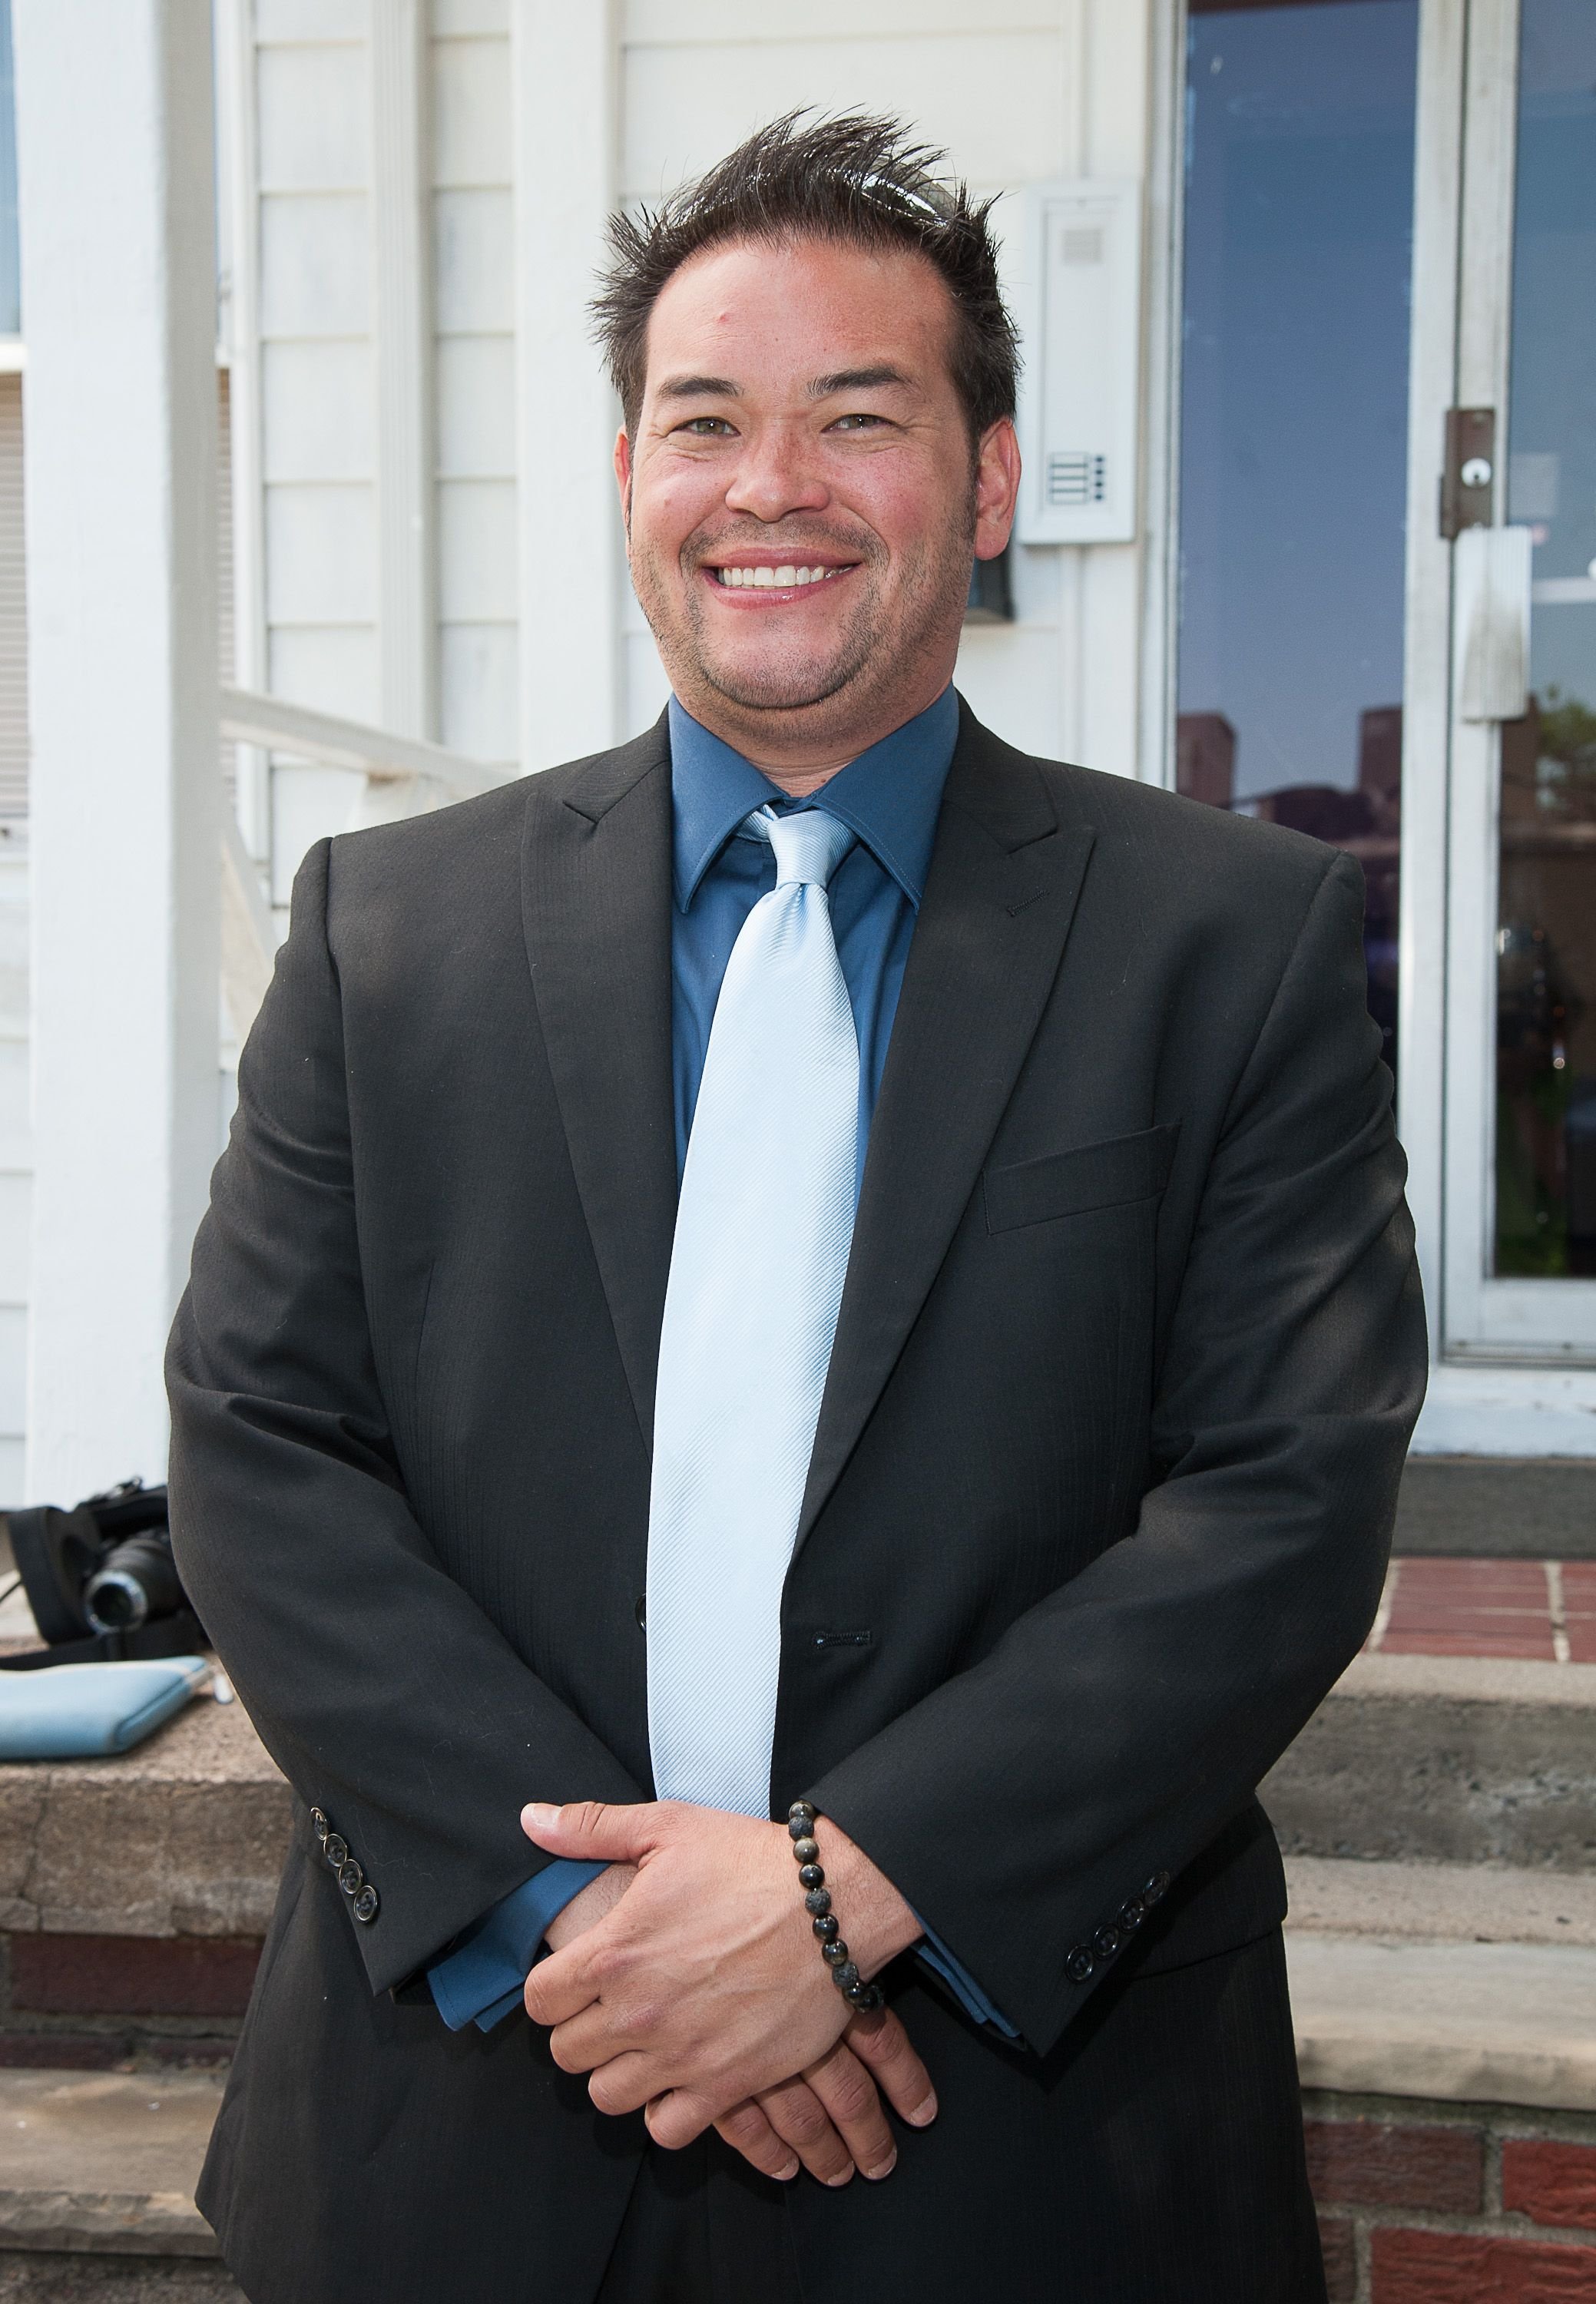 Jon Gosselin during a press conference on Tax Deductible Marriage Counseling at Bergen Marriage Counseling & Psychotherapy on June 27, 2012, in Teaneck, New Jersey. | Source: Getty Images